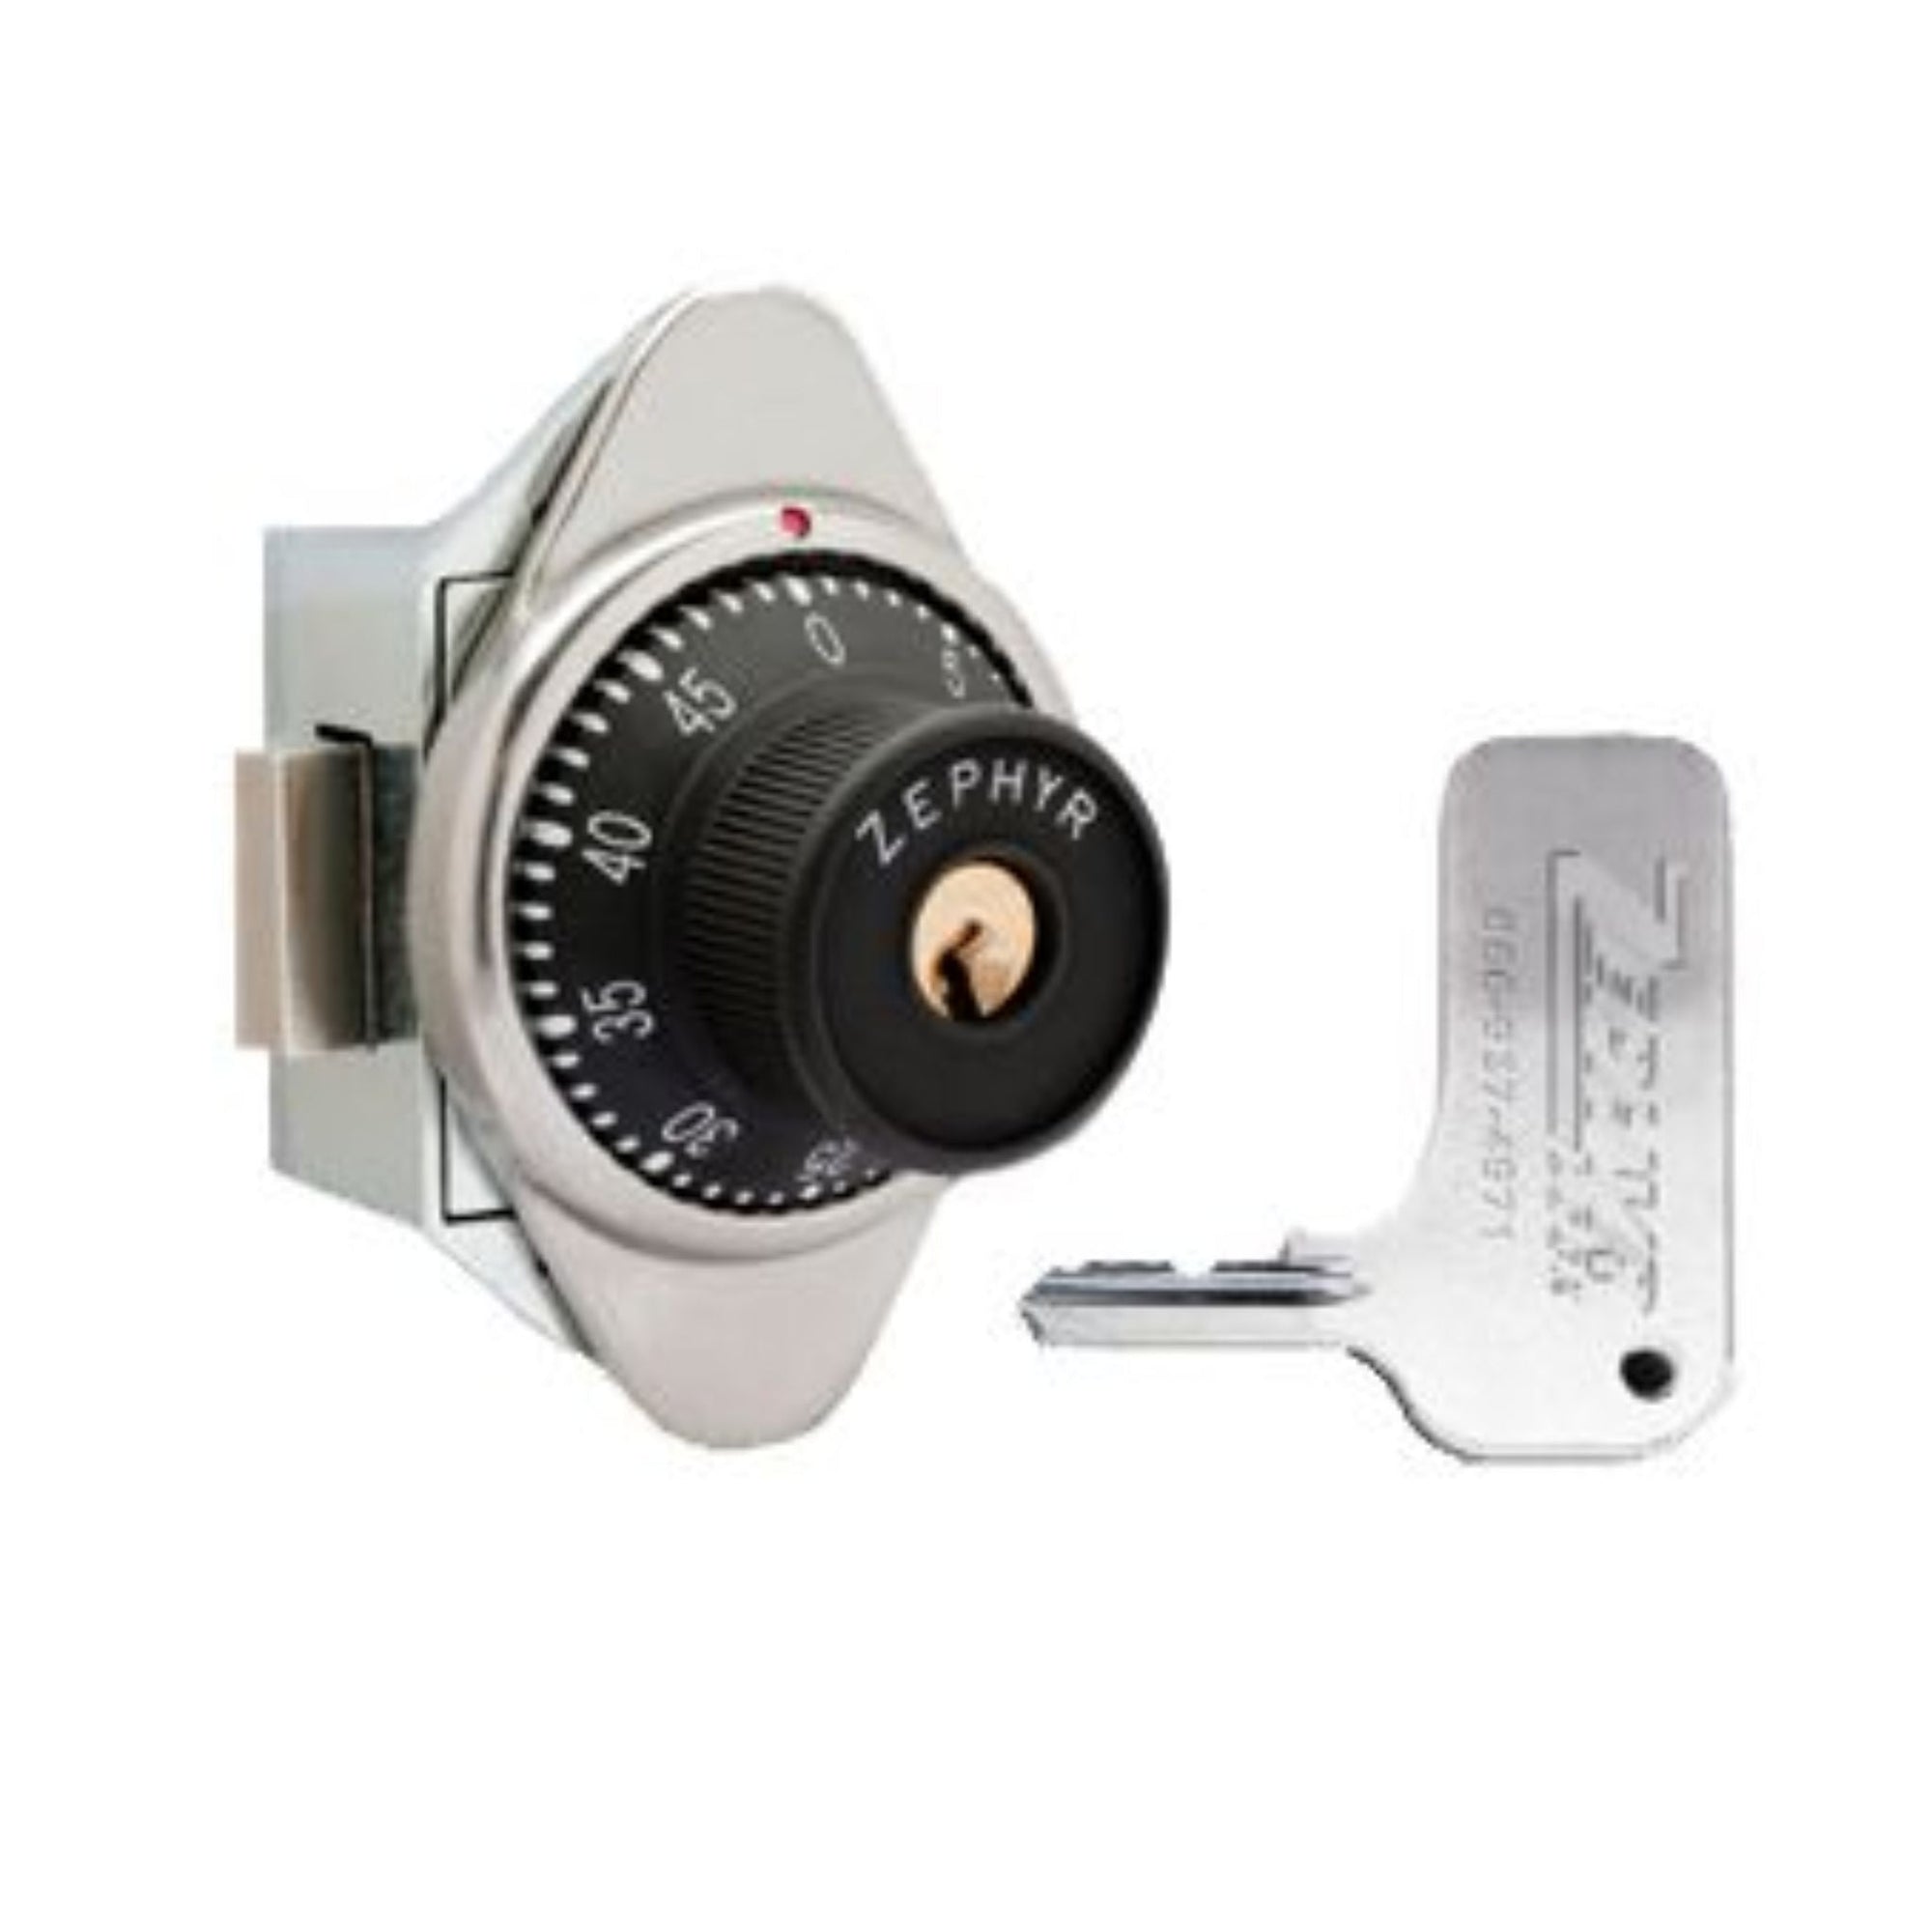 Zephyr 1970ADA RH ADA-Compliant Built-In Combination Locker Locks With Key Control Override for Supervisory Access - The Lock Source